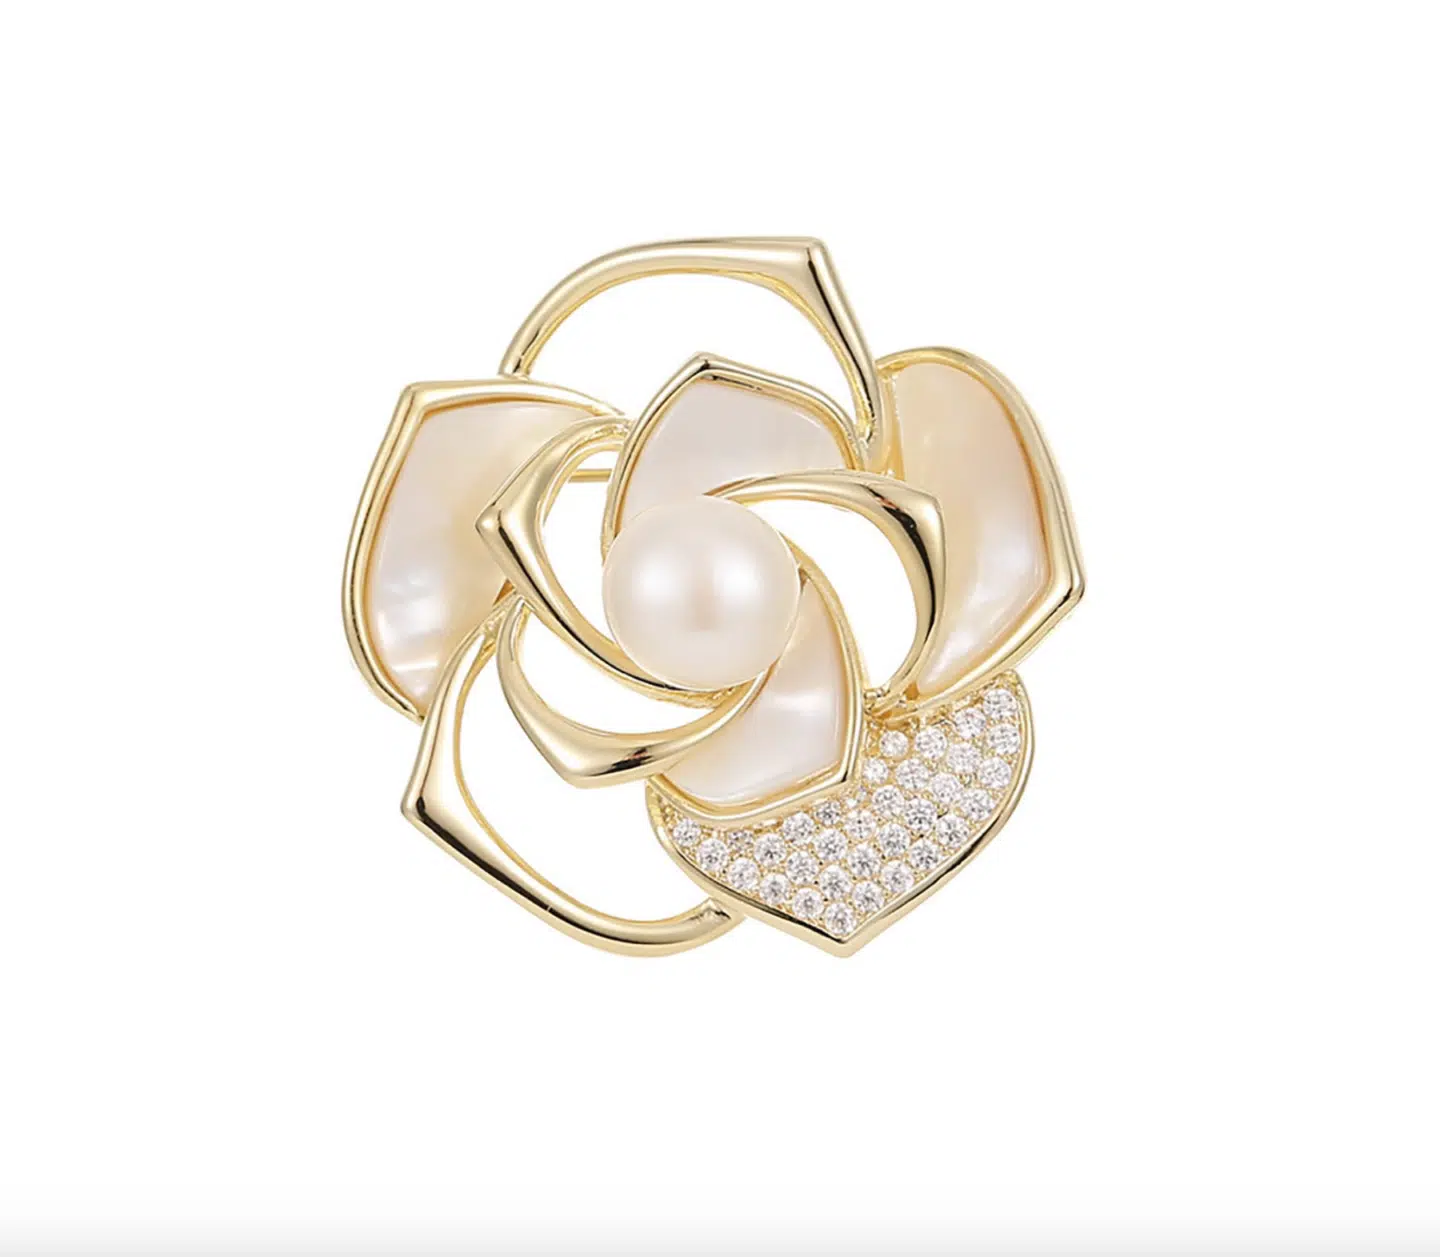 Luxurious Chanel brooch dupes, by fashion blogger What The Fab